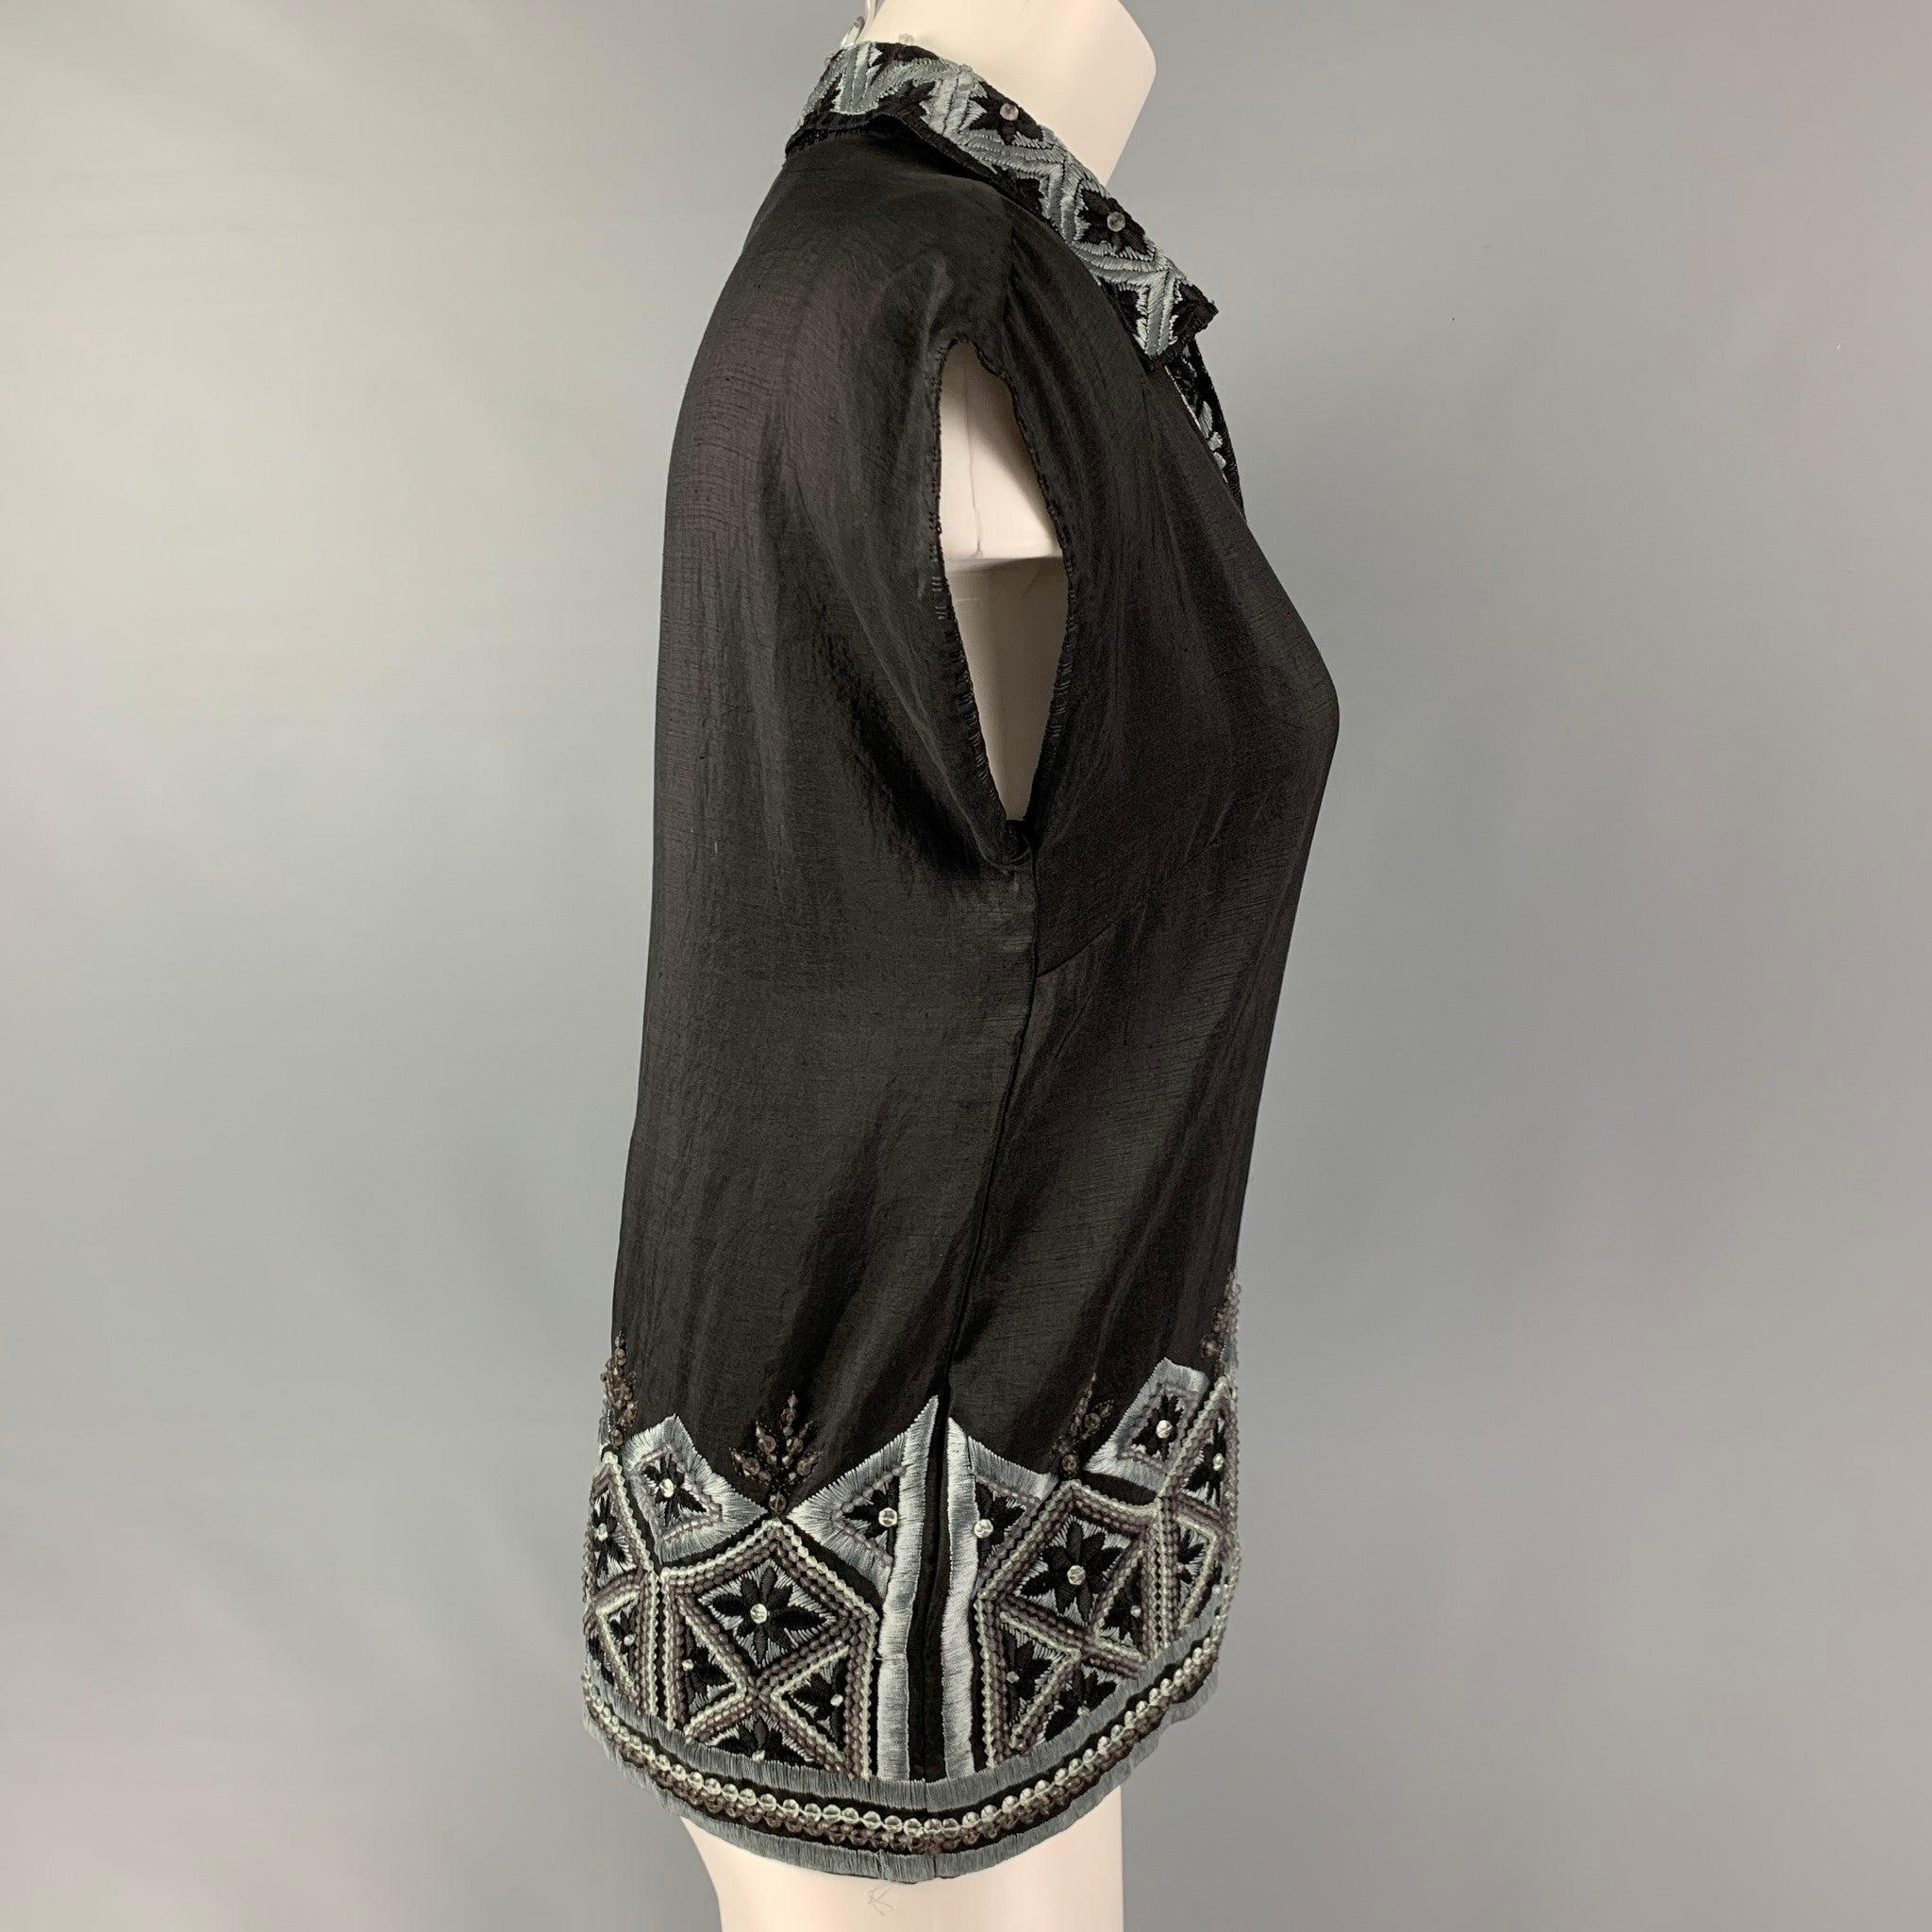 DRIES VAN NOTEN sleeveless tunic comes in a black and blue silk material featuring an open V-neck collar, and beaded embroidery. Made in Belgium.Very Good Pre-Owned Condition. Minor Signs of Wear. 

Marked:   36 

Measurements: 
 
Shoulder: 20